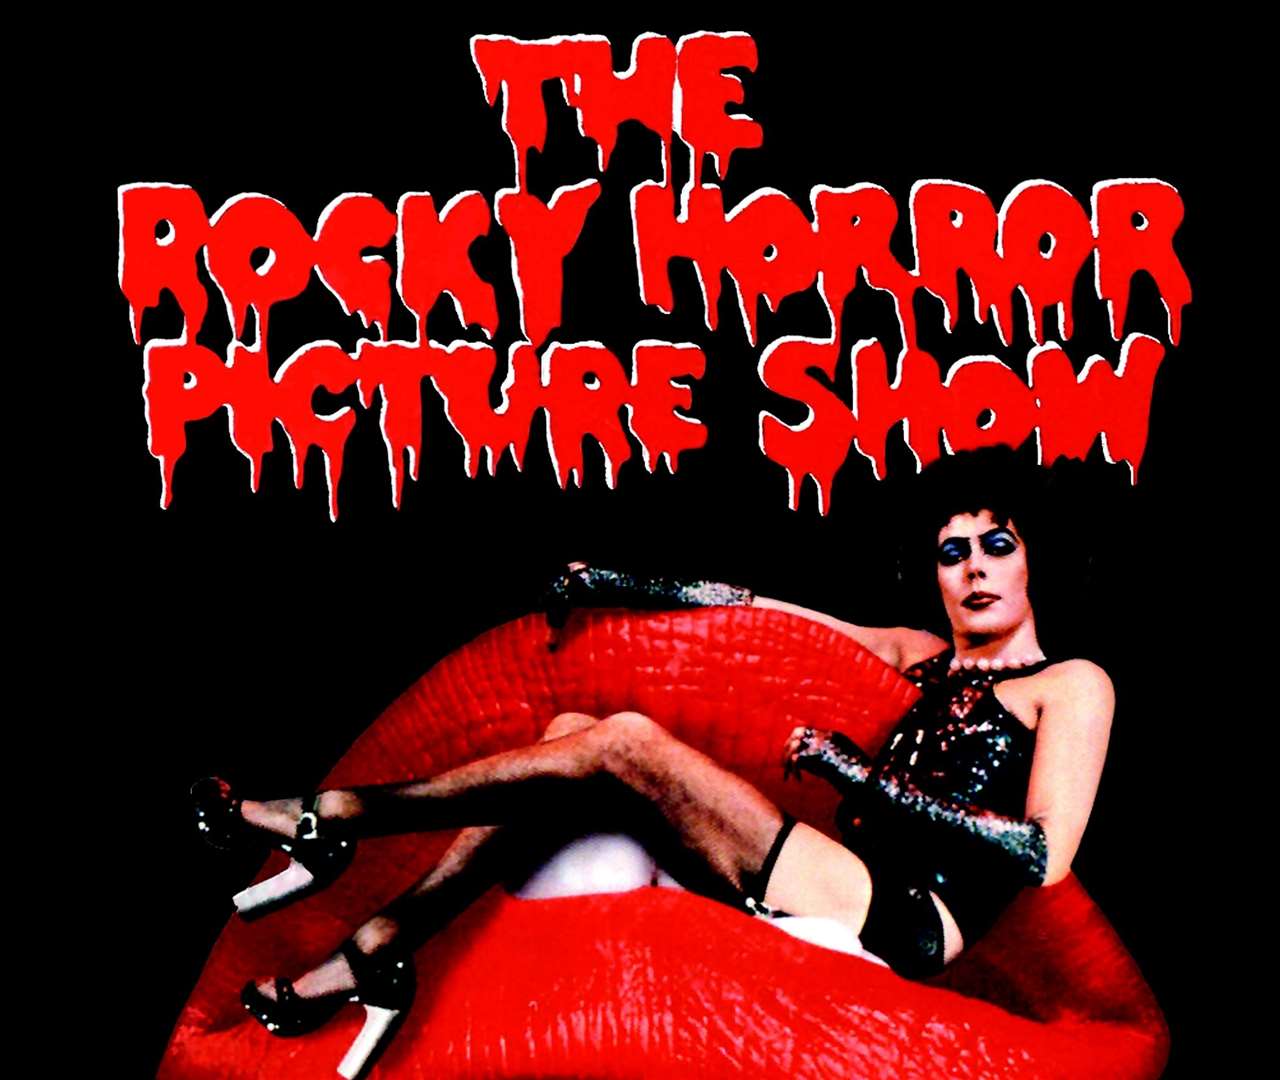 There are two screenings of cult classic the Rocky Horror Picture Show in Kent this Halloween. Picture: 20th Century Fox